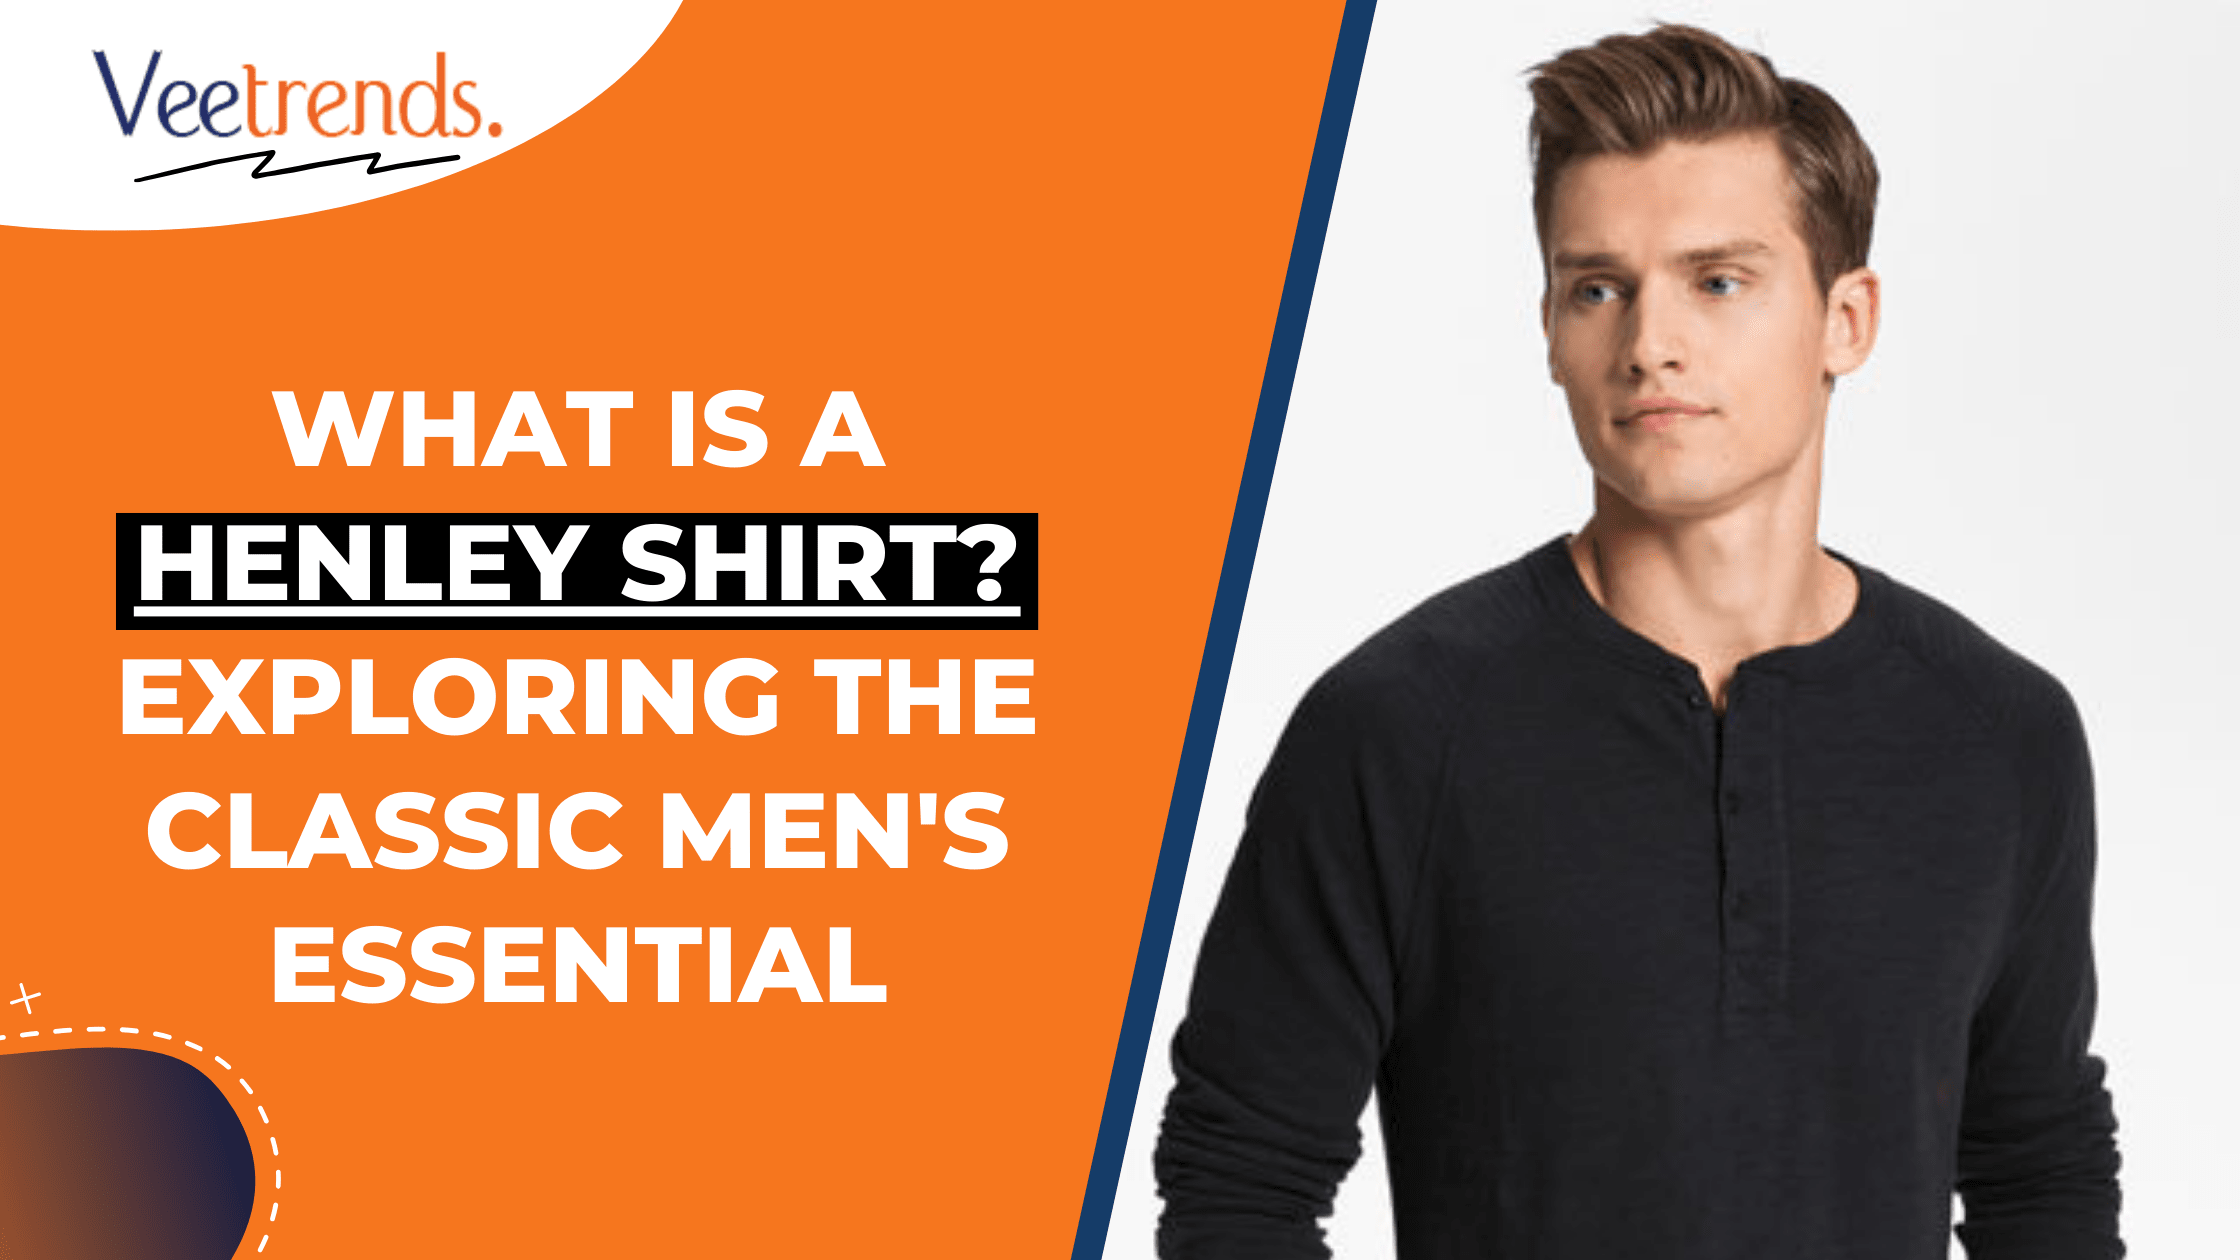 How to Choose the Most Versatile Sports Shirts Without Being Bland